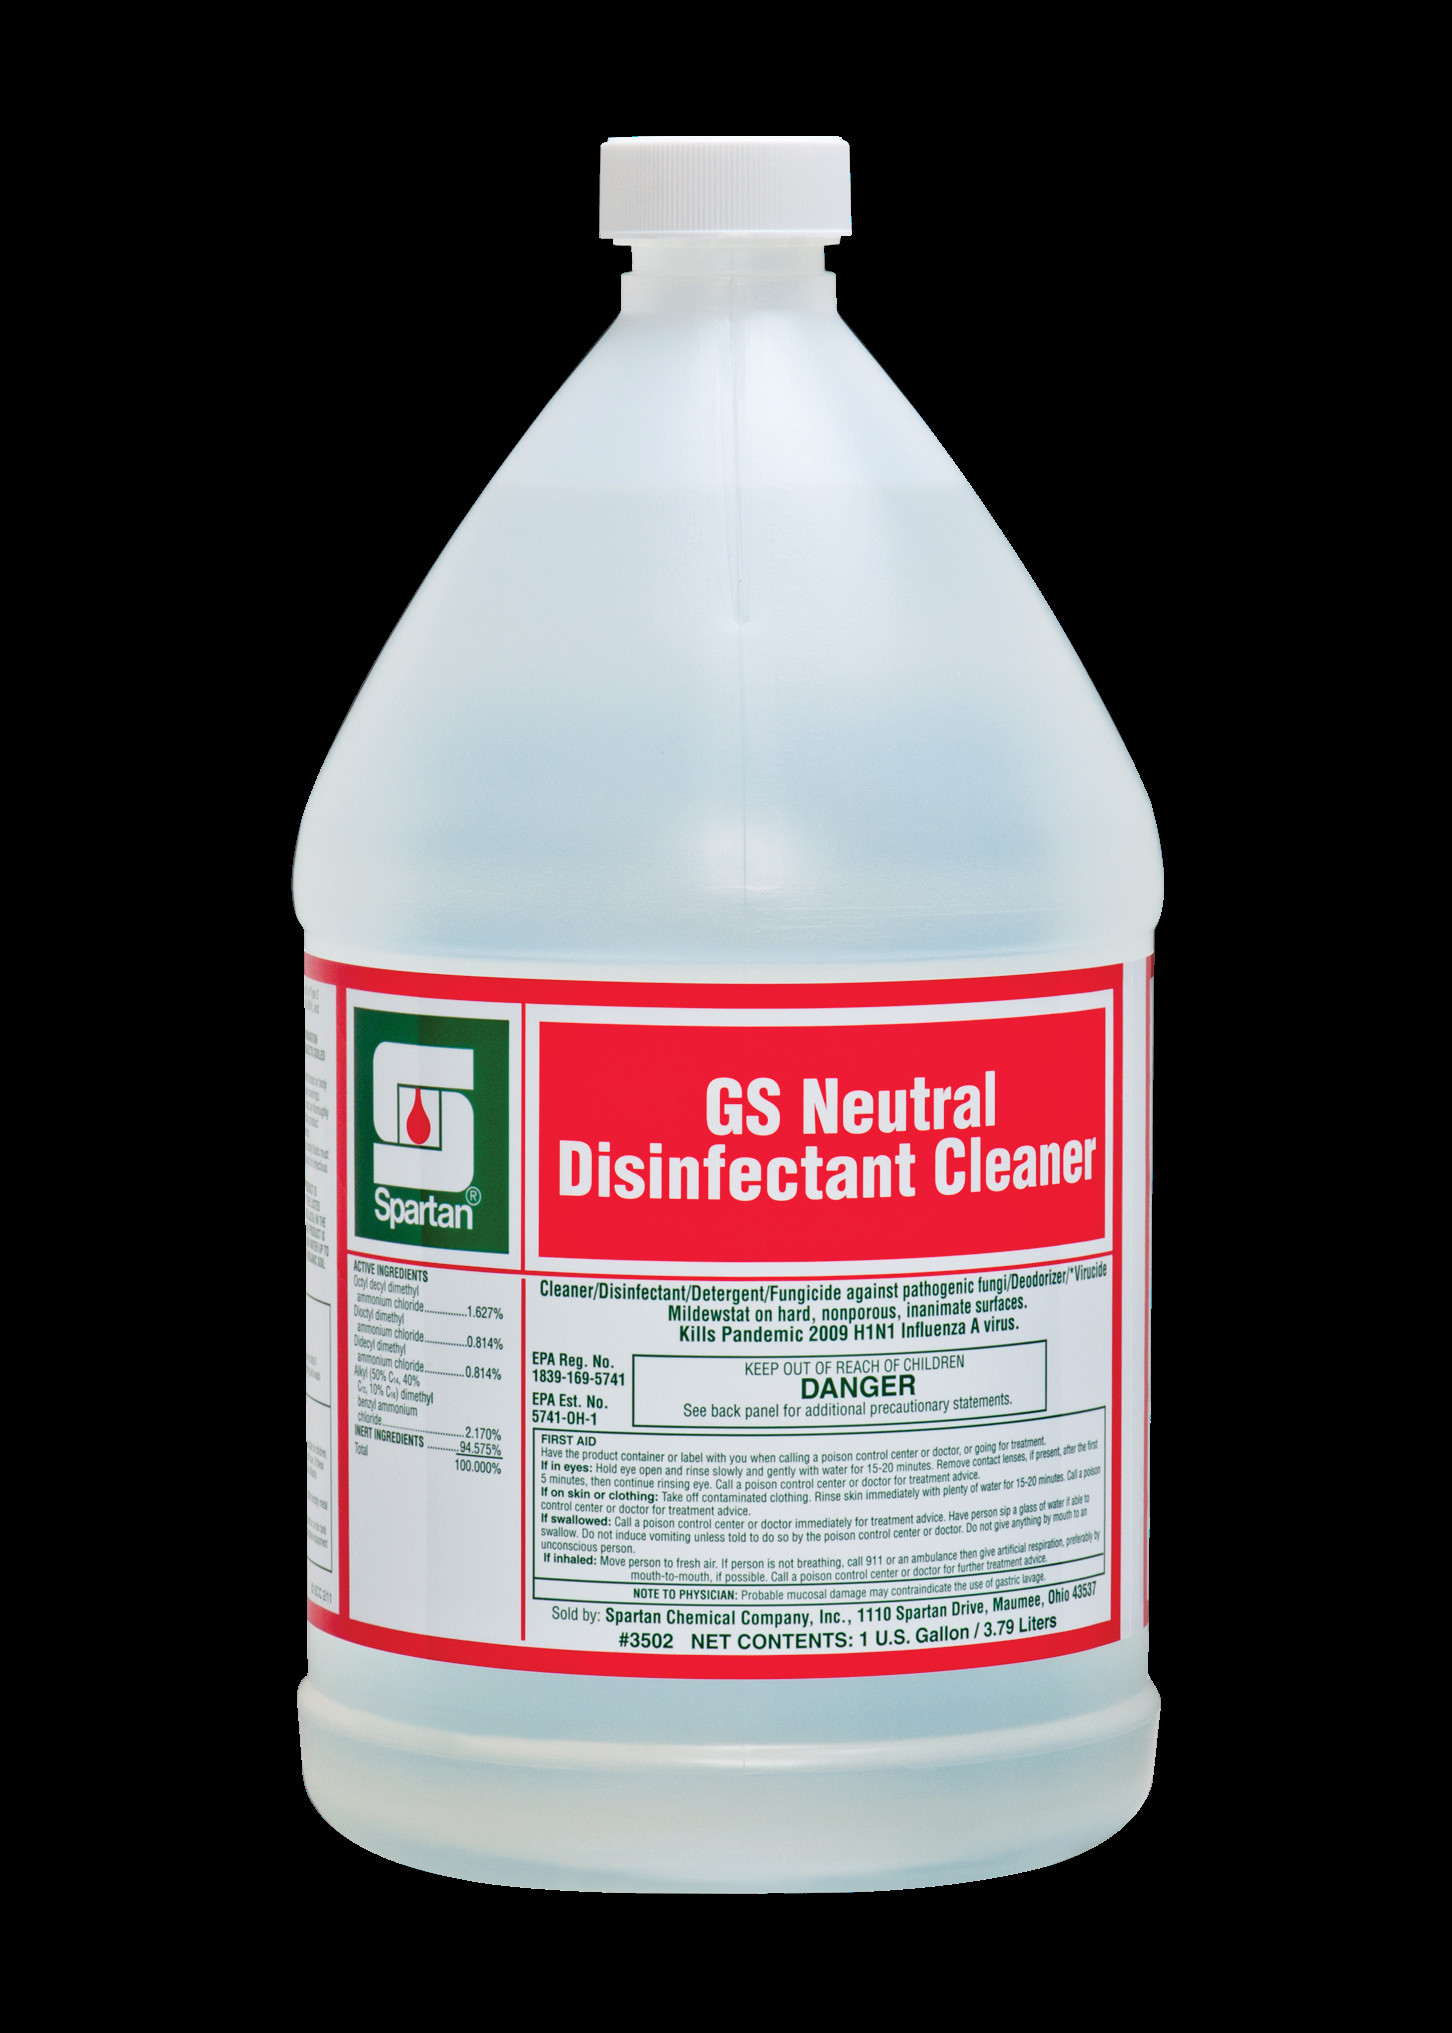 Spartan Chemical Company GS Neutral Disinfectant Cleaner, 1 Gallon Jug